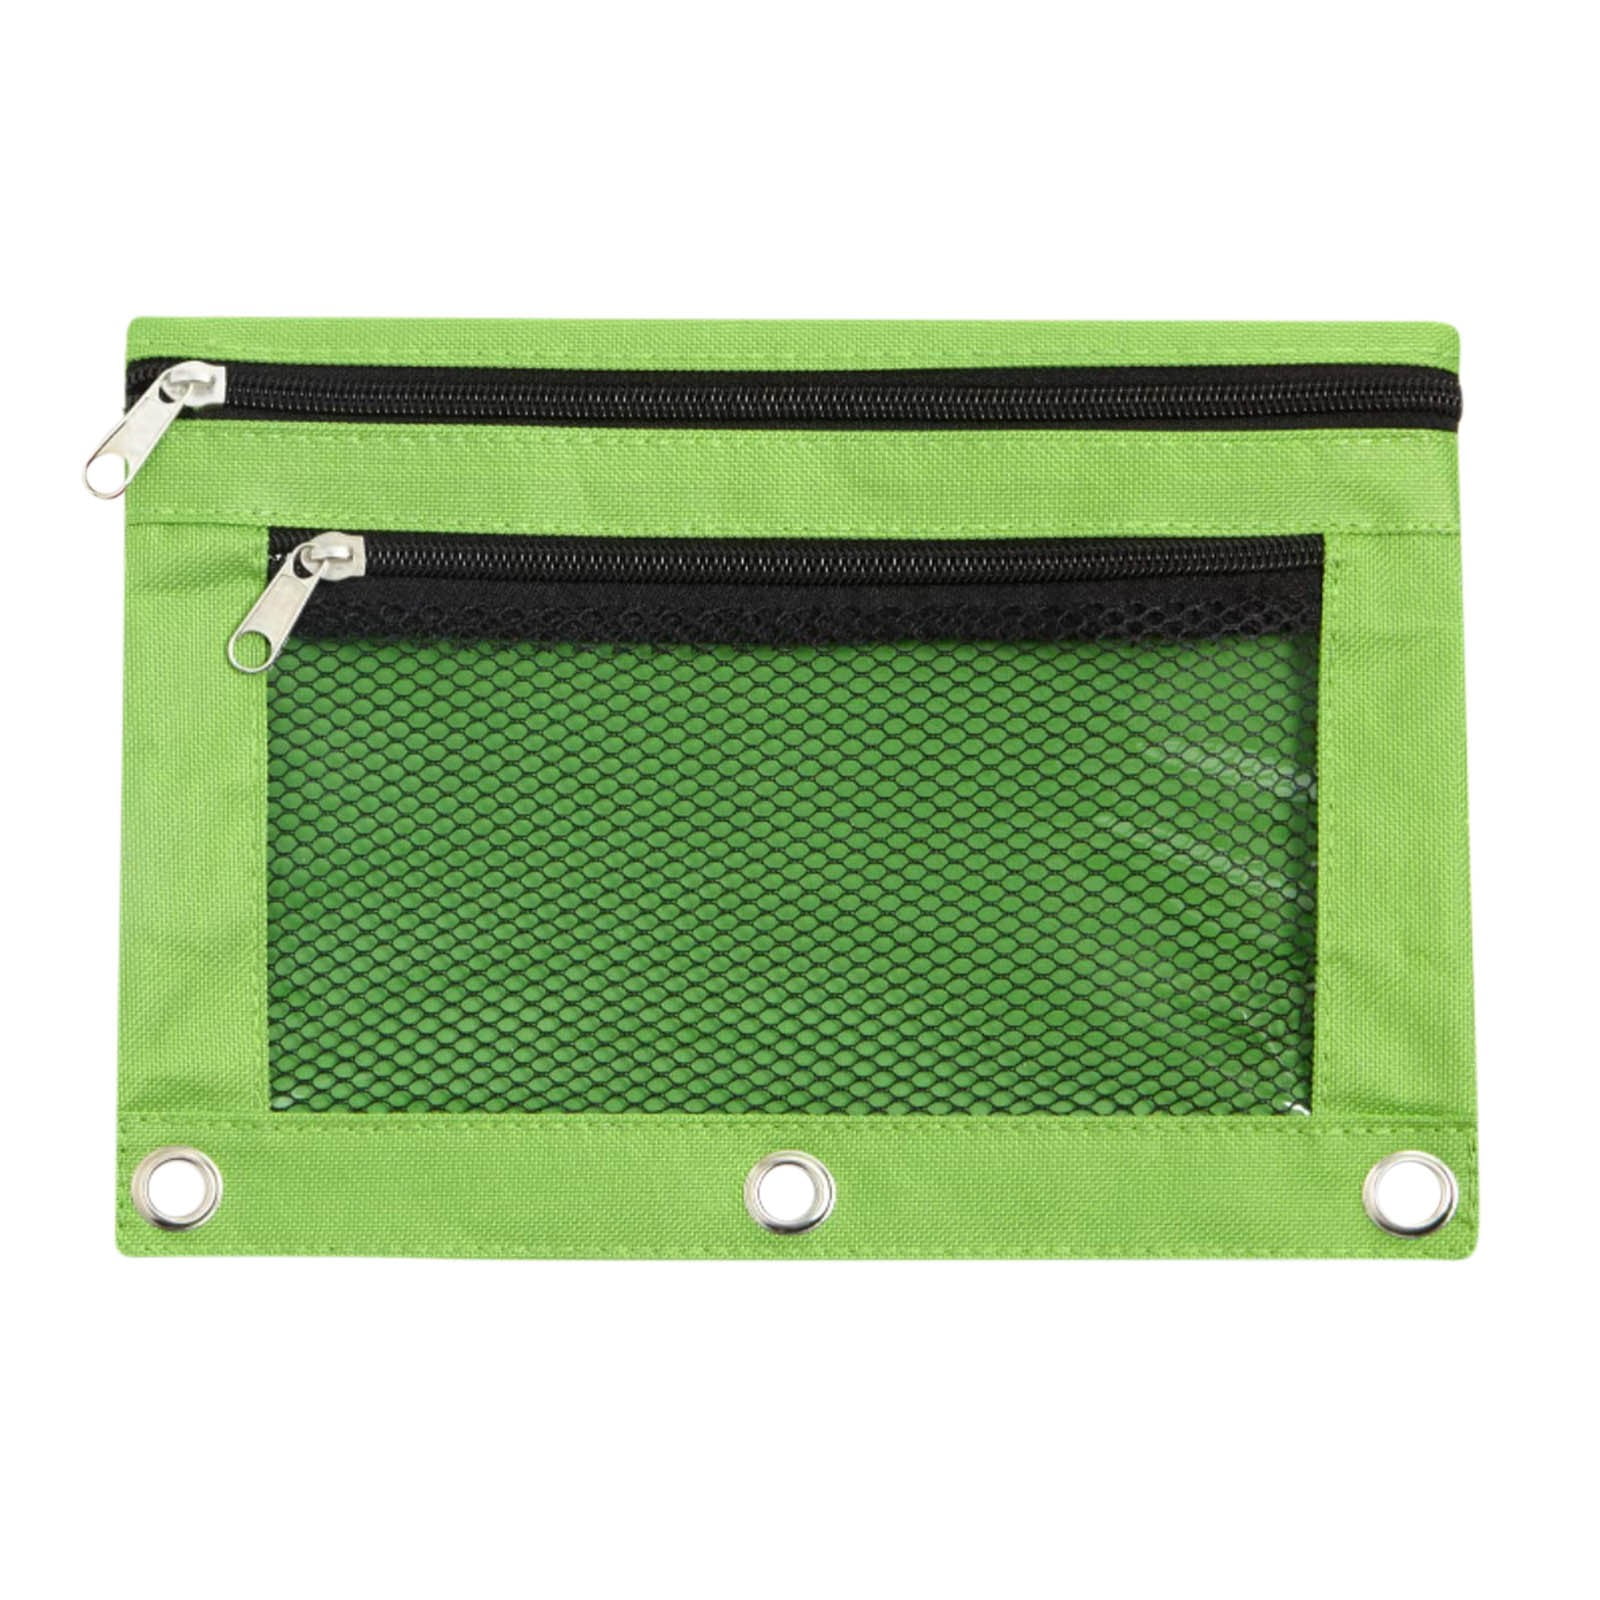 Binder Pouches Gradient Sage Green Pencil Pouch for 3 Ring Binder 2 Pack  Binder Pencil Pouch with Clear Window Pencil Bags with Zipper for School